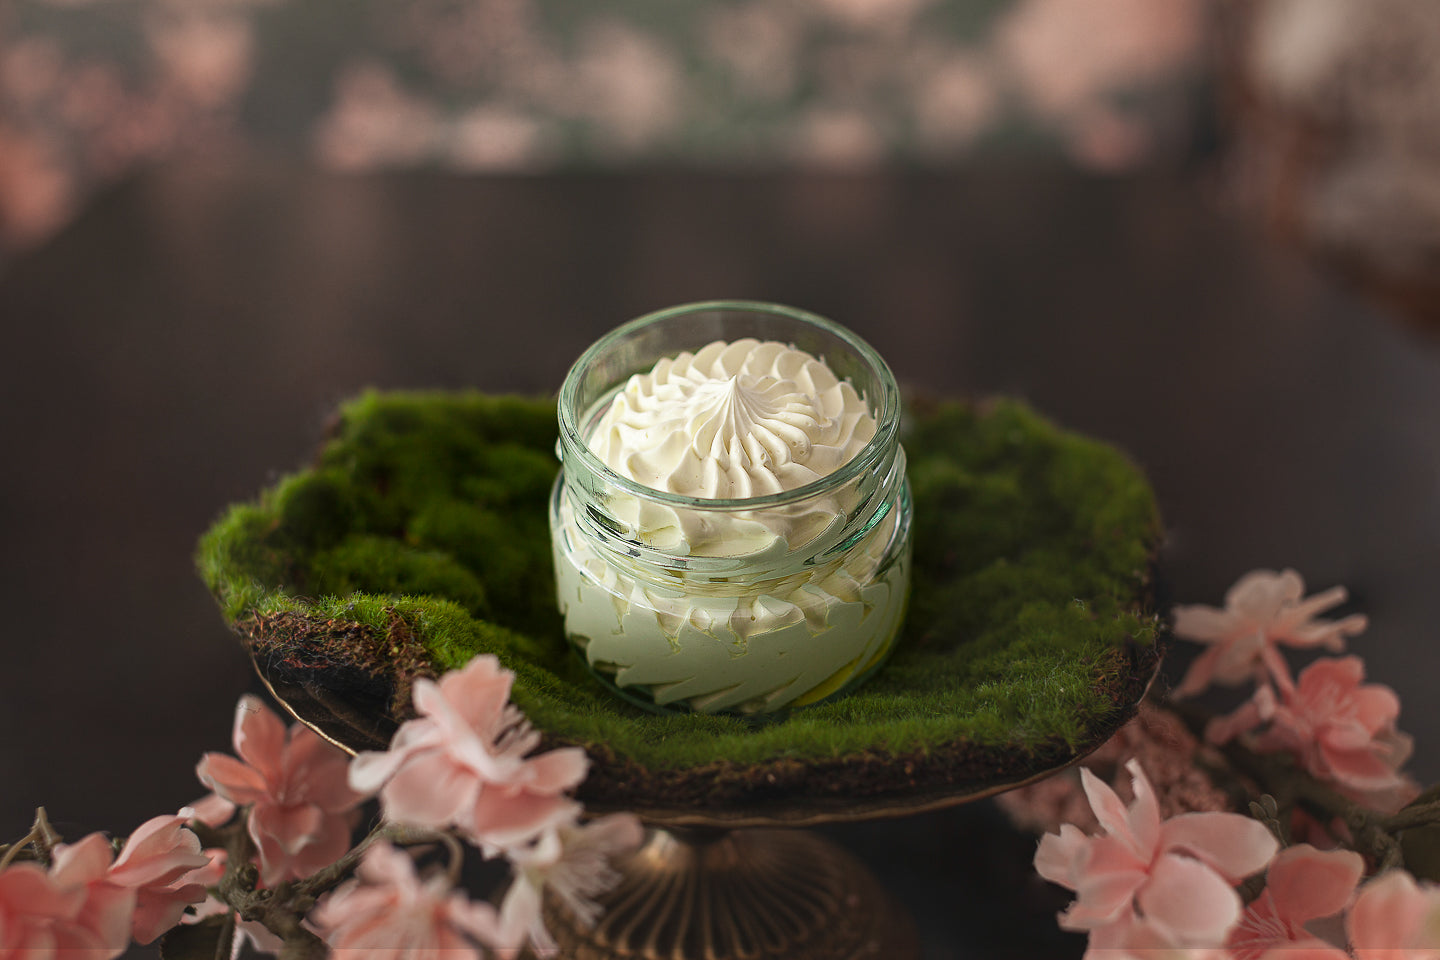 Whipped body butter: Peach blossom